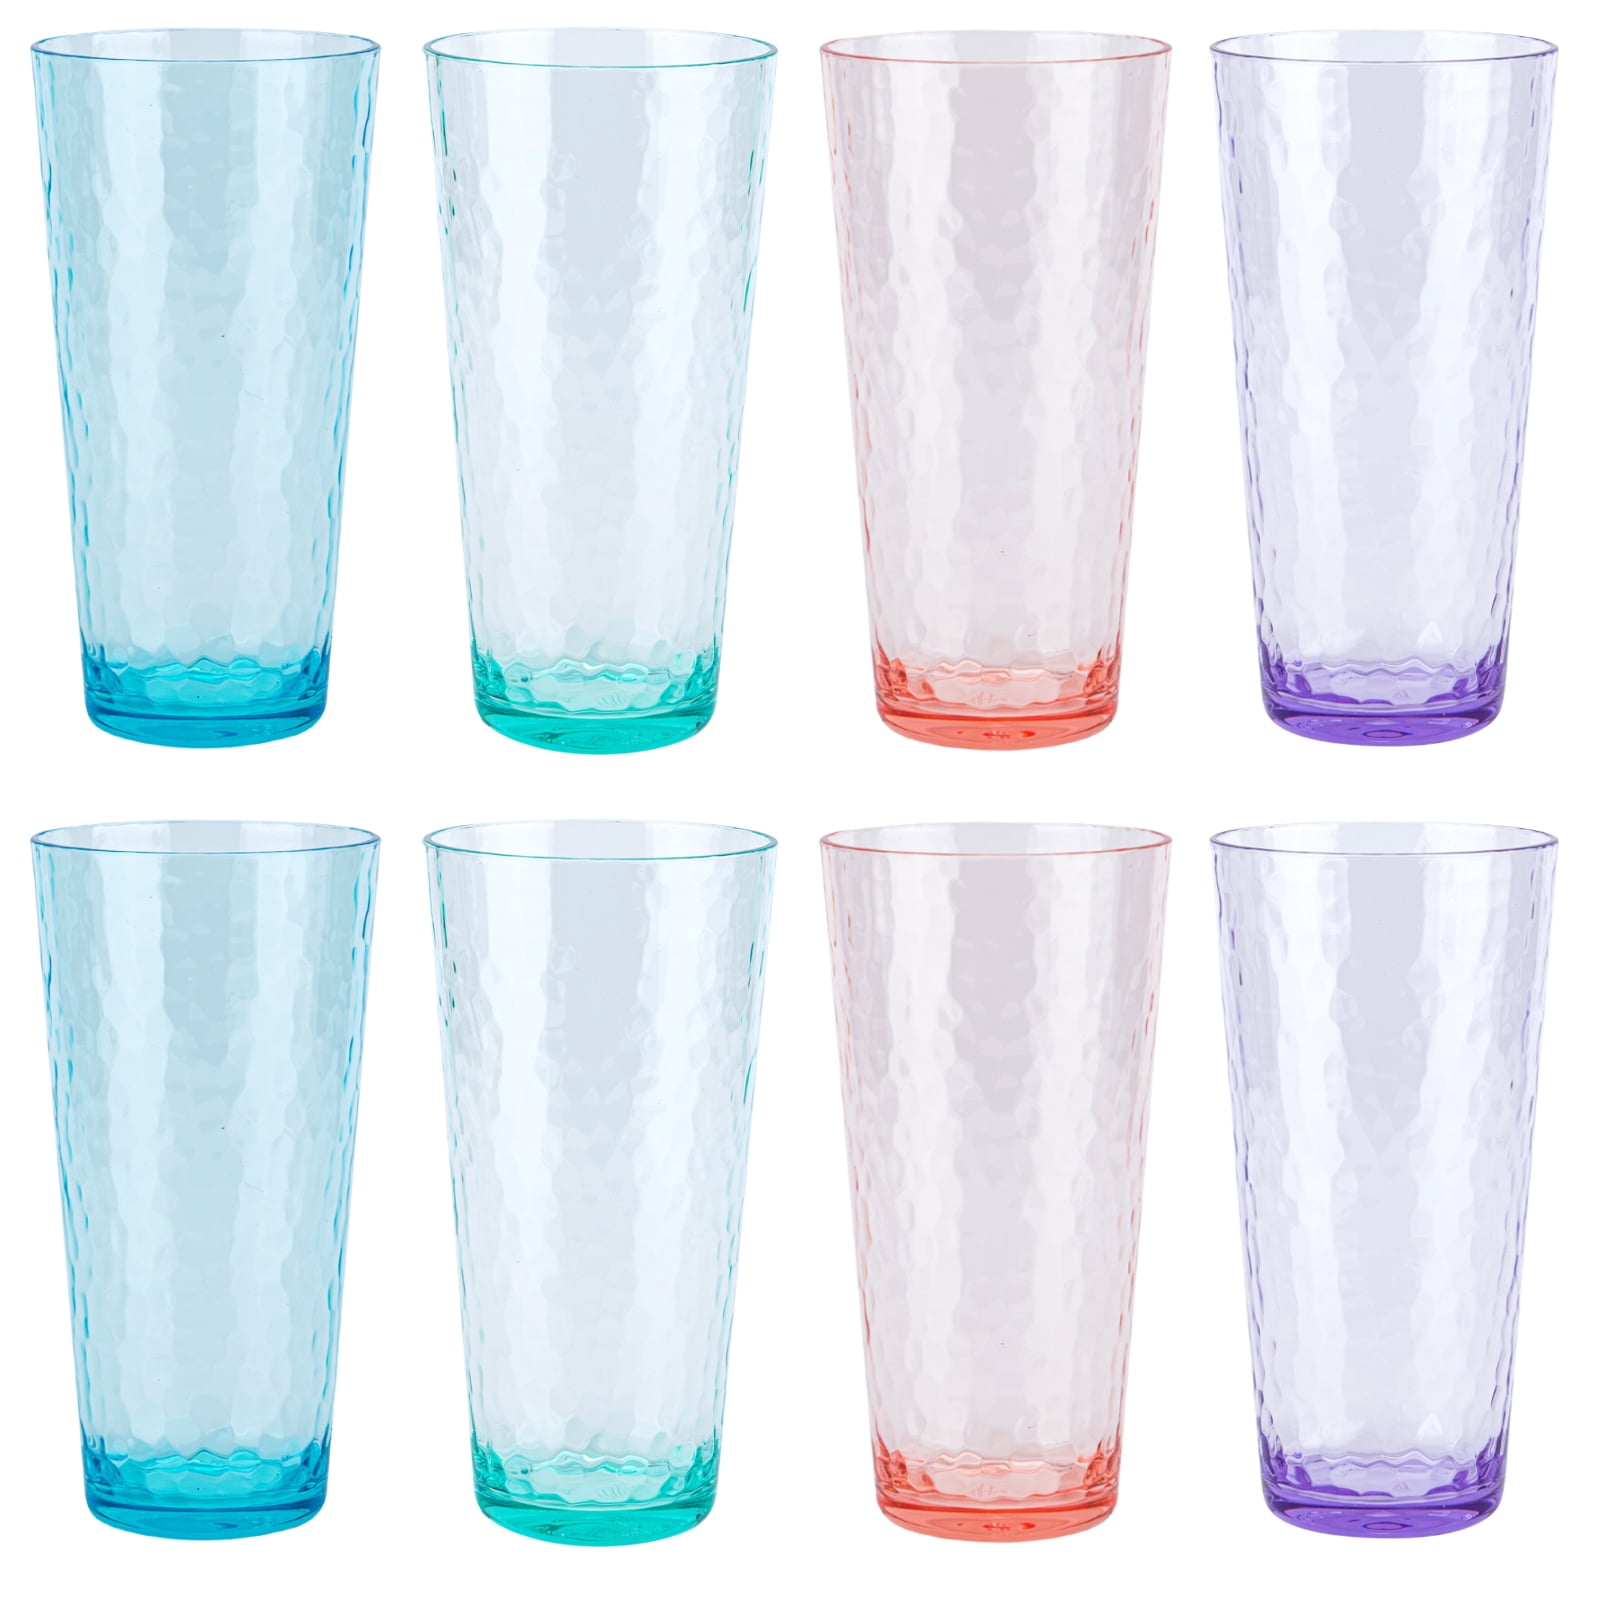 KLIFA- WASCO- 18.6 ounce, Set of 6, Acrylic Highball Drinking Glasses,  BPA-Free, Plastic Drinkware, Dishwasher Safe Cups, Clear